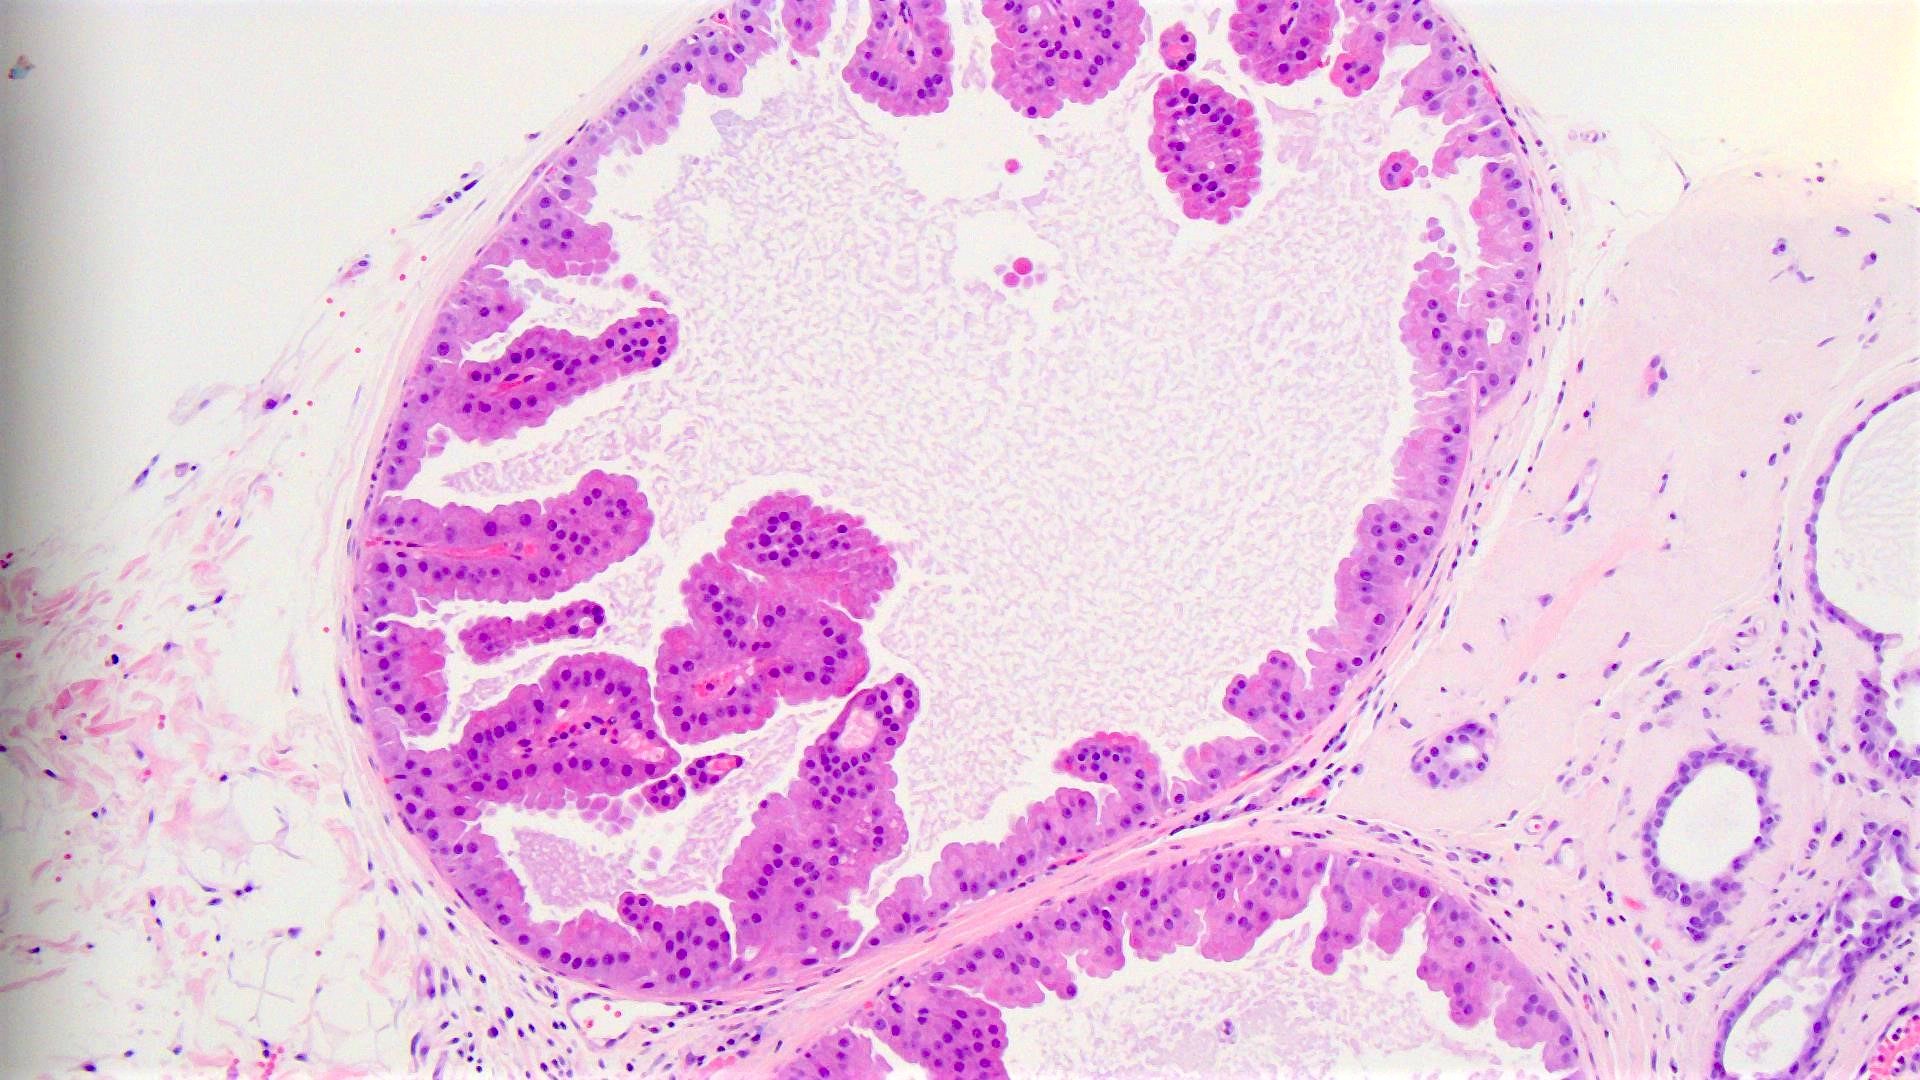 Intraductal papilloma with apocrine atypia